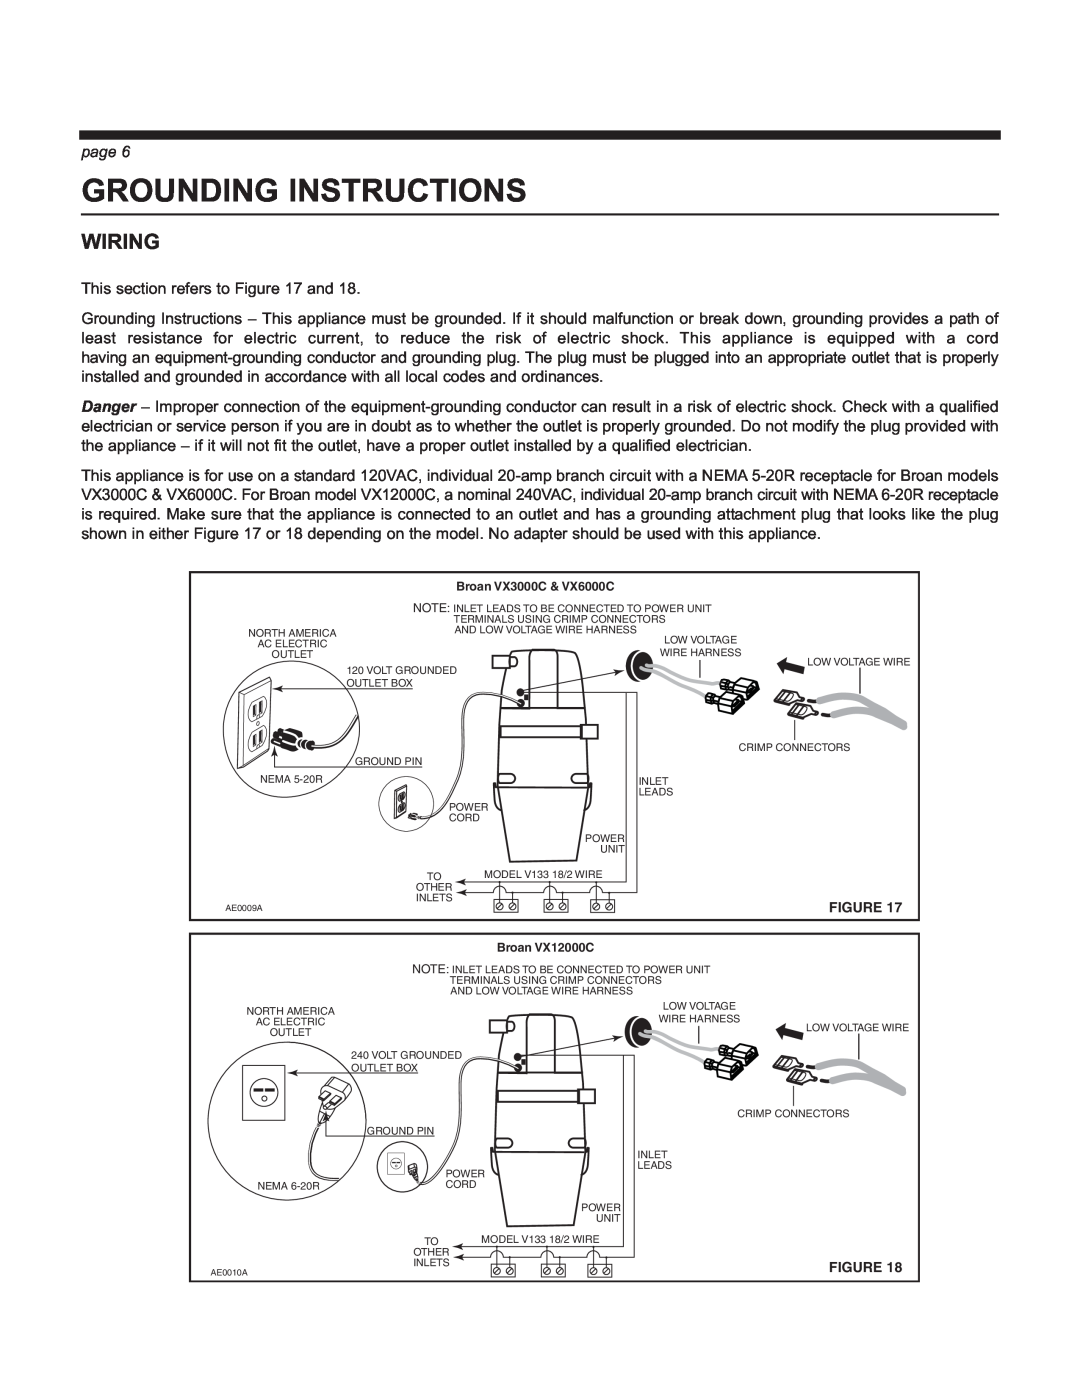 Broan VX12000C manual Grounding Instructions, Wiring, page 